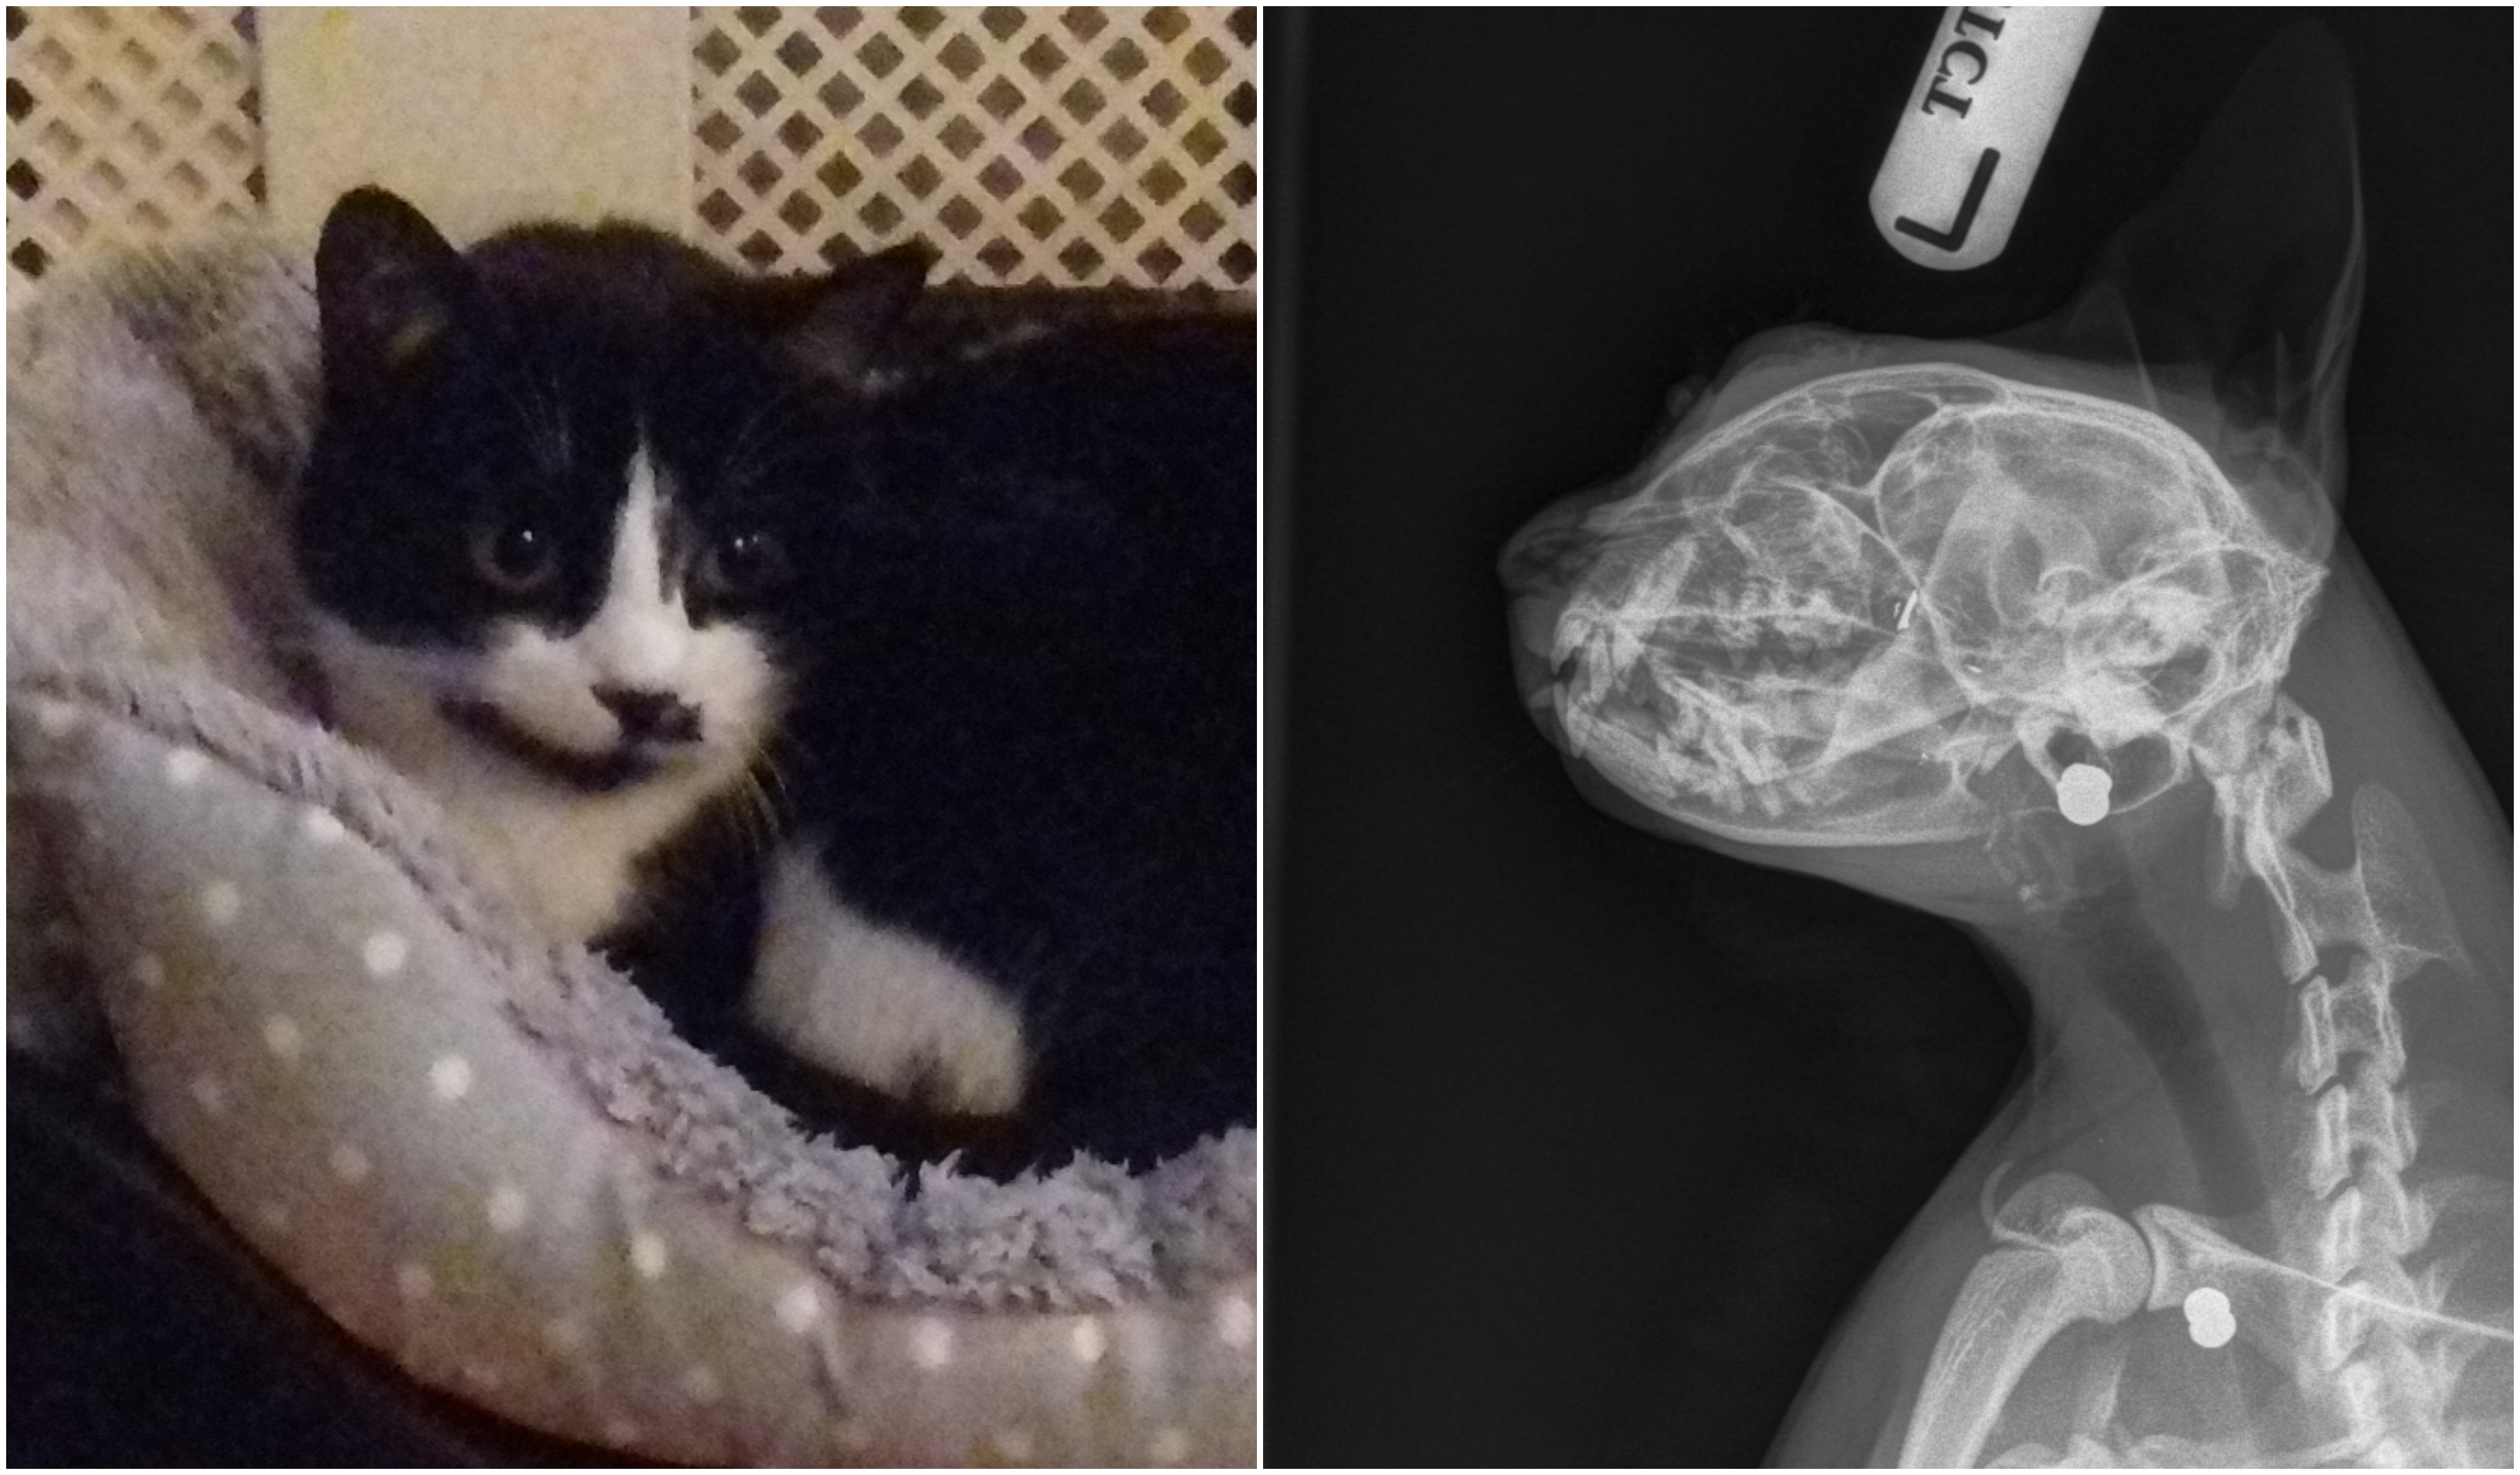 Oreo the cat was left with serious injuries after being shot with an air rifle (Scottish SPCA)